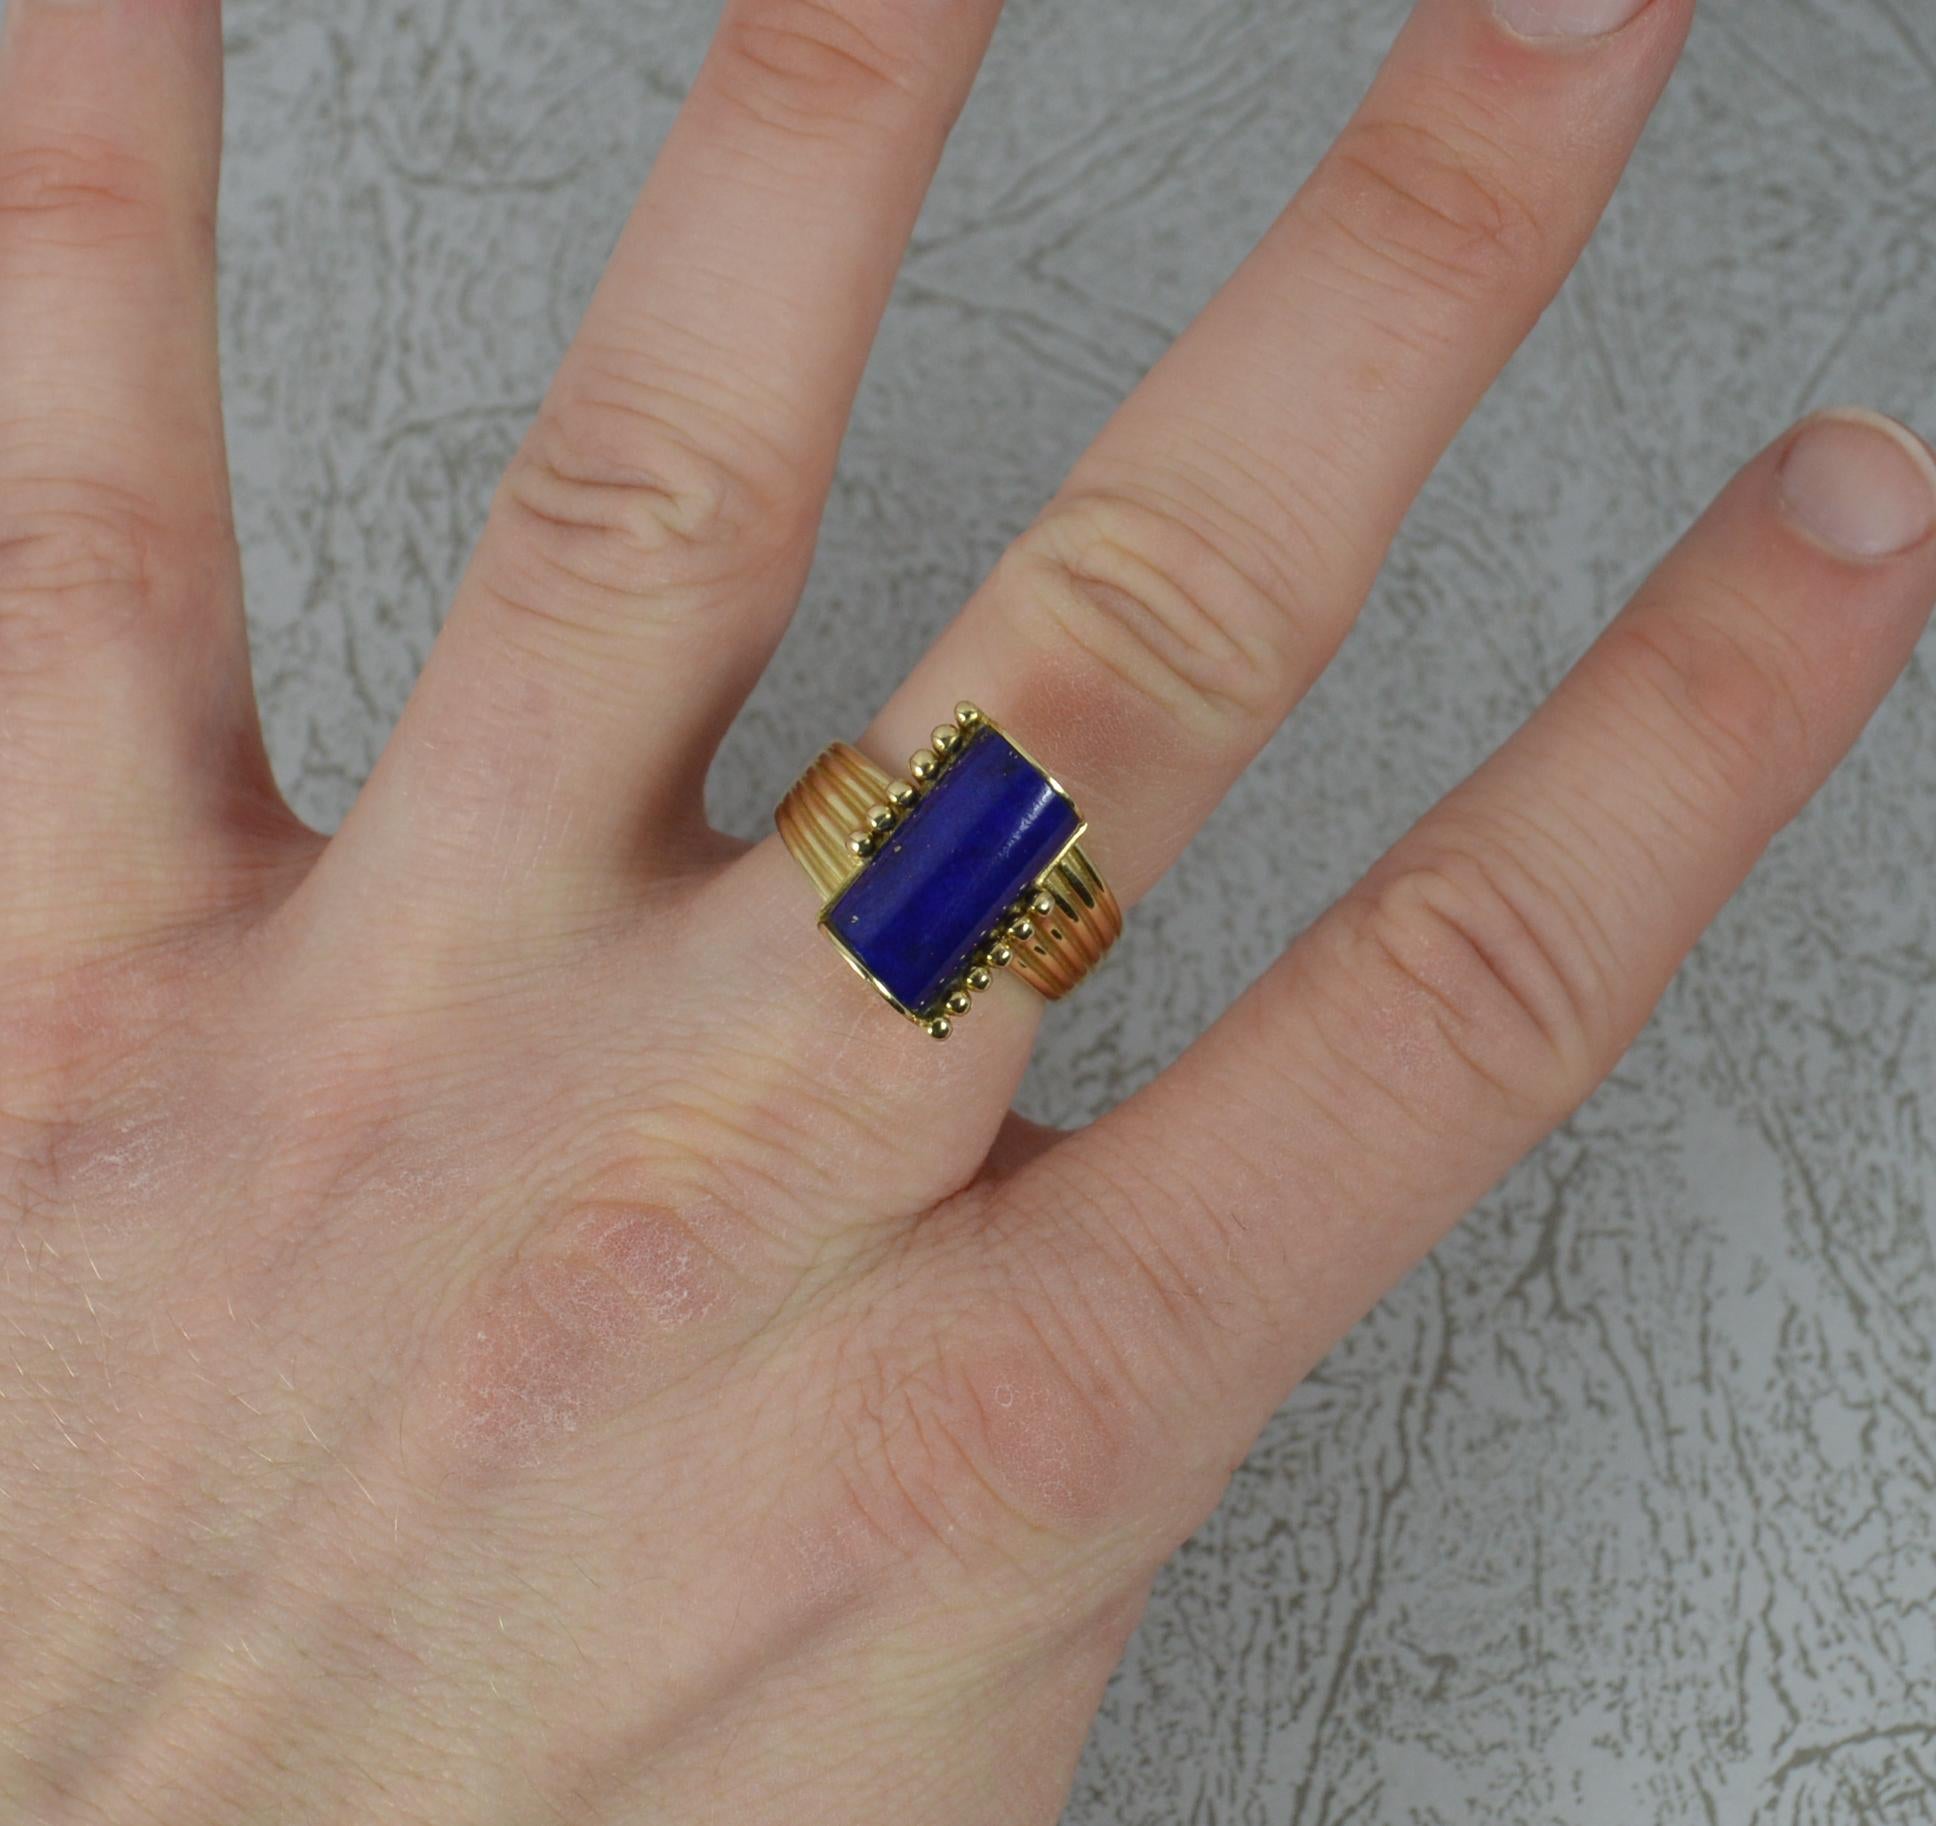 A very stylish retro solitaire ring.
Solid 14 carat yellow gold example.
Designed with a single cylinder shaped lapis lazuli stone. 7mm x 14mm. On twist.
Protruding 9mm off the finger.

CONDITION ; Very good. Clean and strong band. Securely set